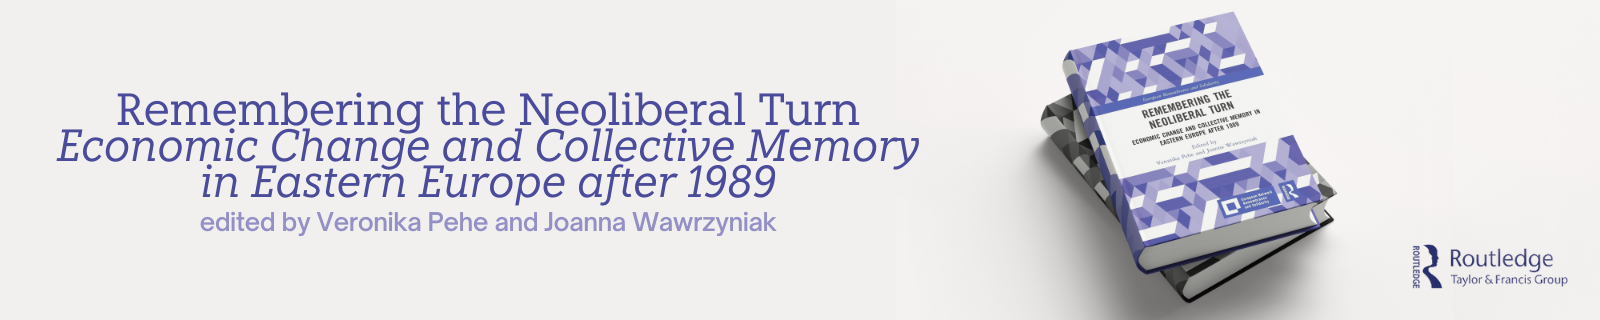 cover image of Remembering the Neoliberal Turn project